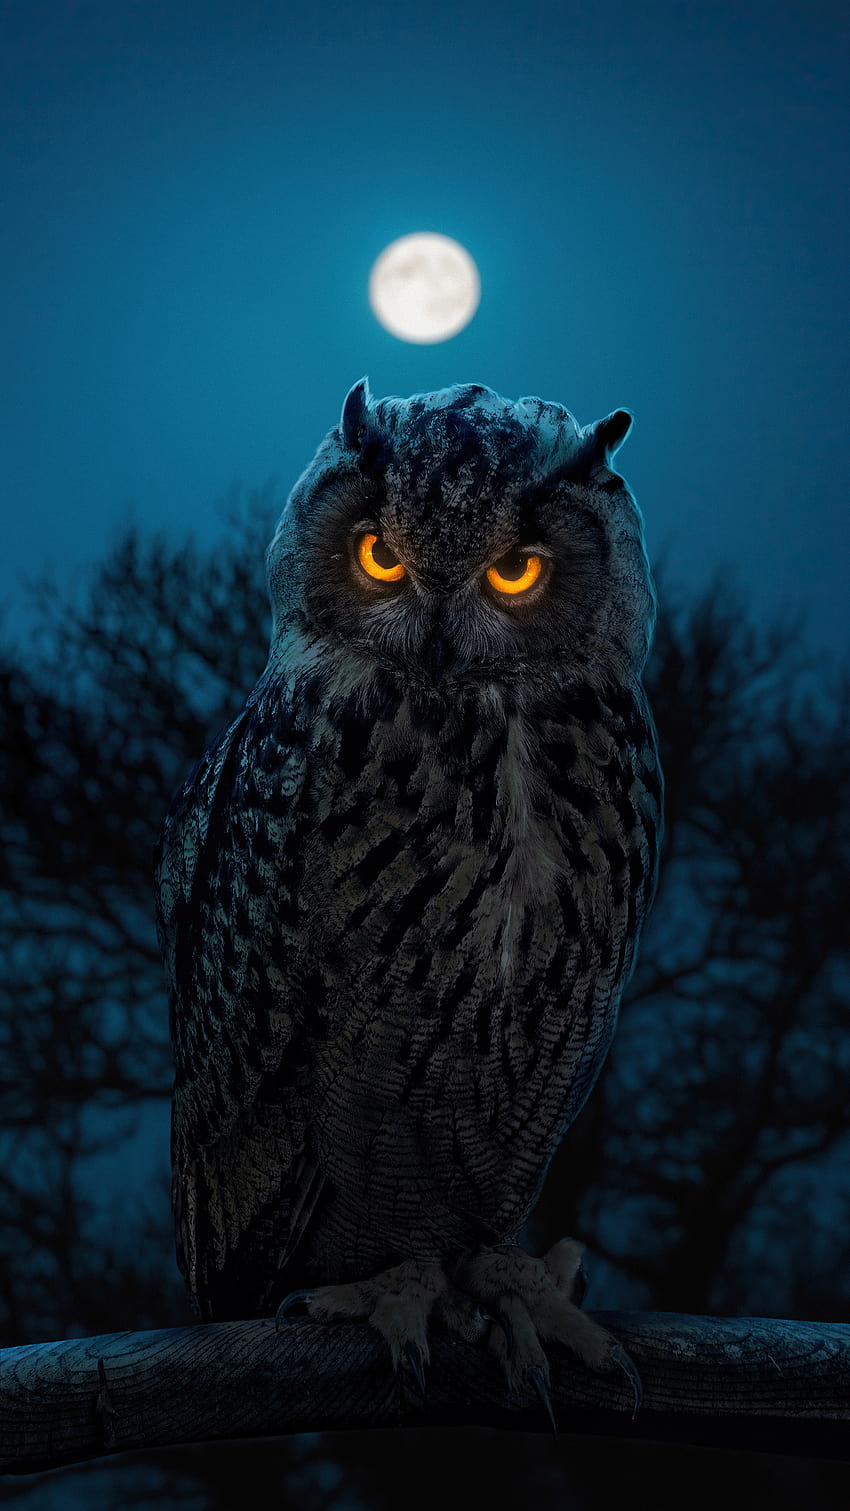 1080x1920 Owl Glowing Eyes Iphone 7,6s,6 Plus, Pixel xl ,One Plus 3,3t,5 , Backgrounds, and HD phone wallpaper